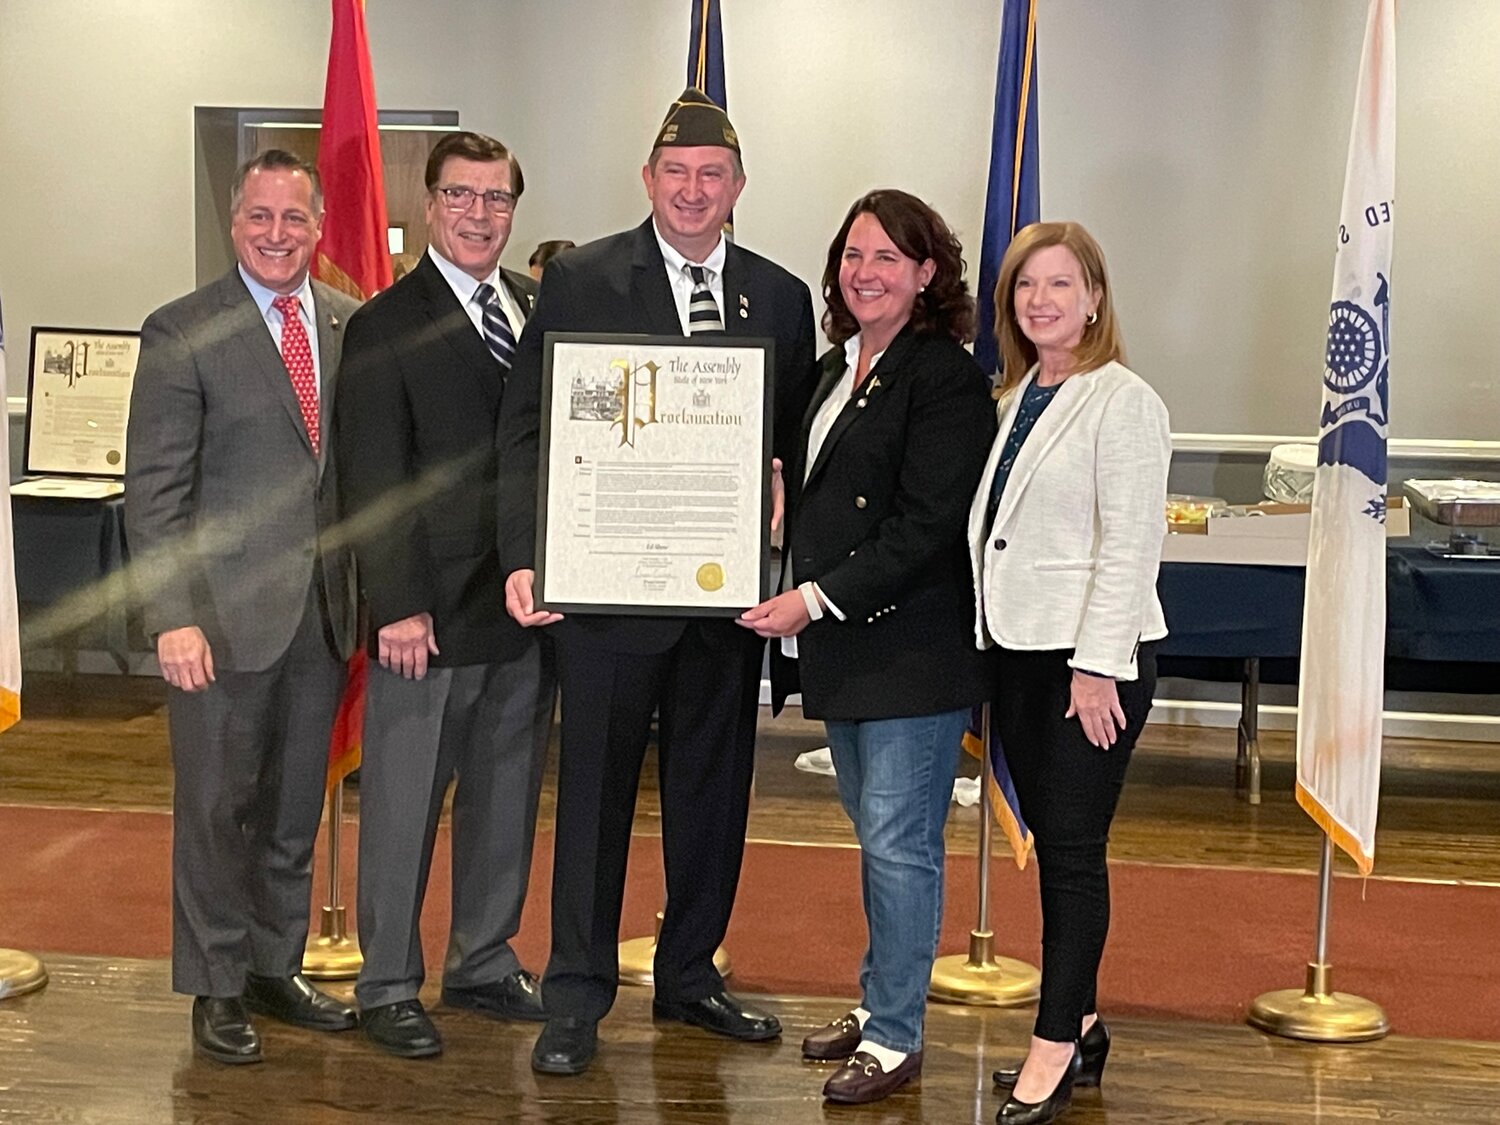 Ed Shaw, of Lynbrook, was inducted into Assemblyman Brian Curran’s Veterans Hall of Fame. Mayor Alan Beach, State Sen. Patricia Canzoneri-Fitzpatrick and Hempstead Town Councilwoman Laura Ryder joined Curran in honoring Shaw for his service.